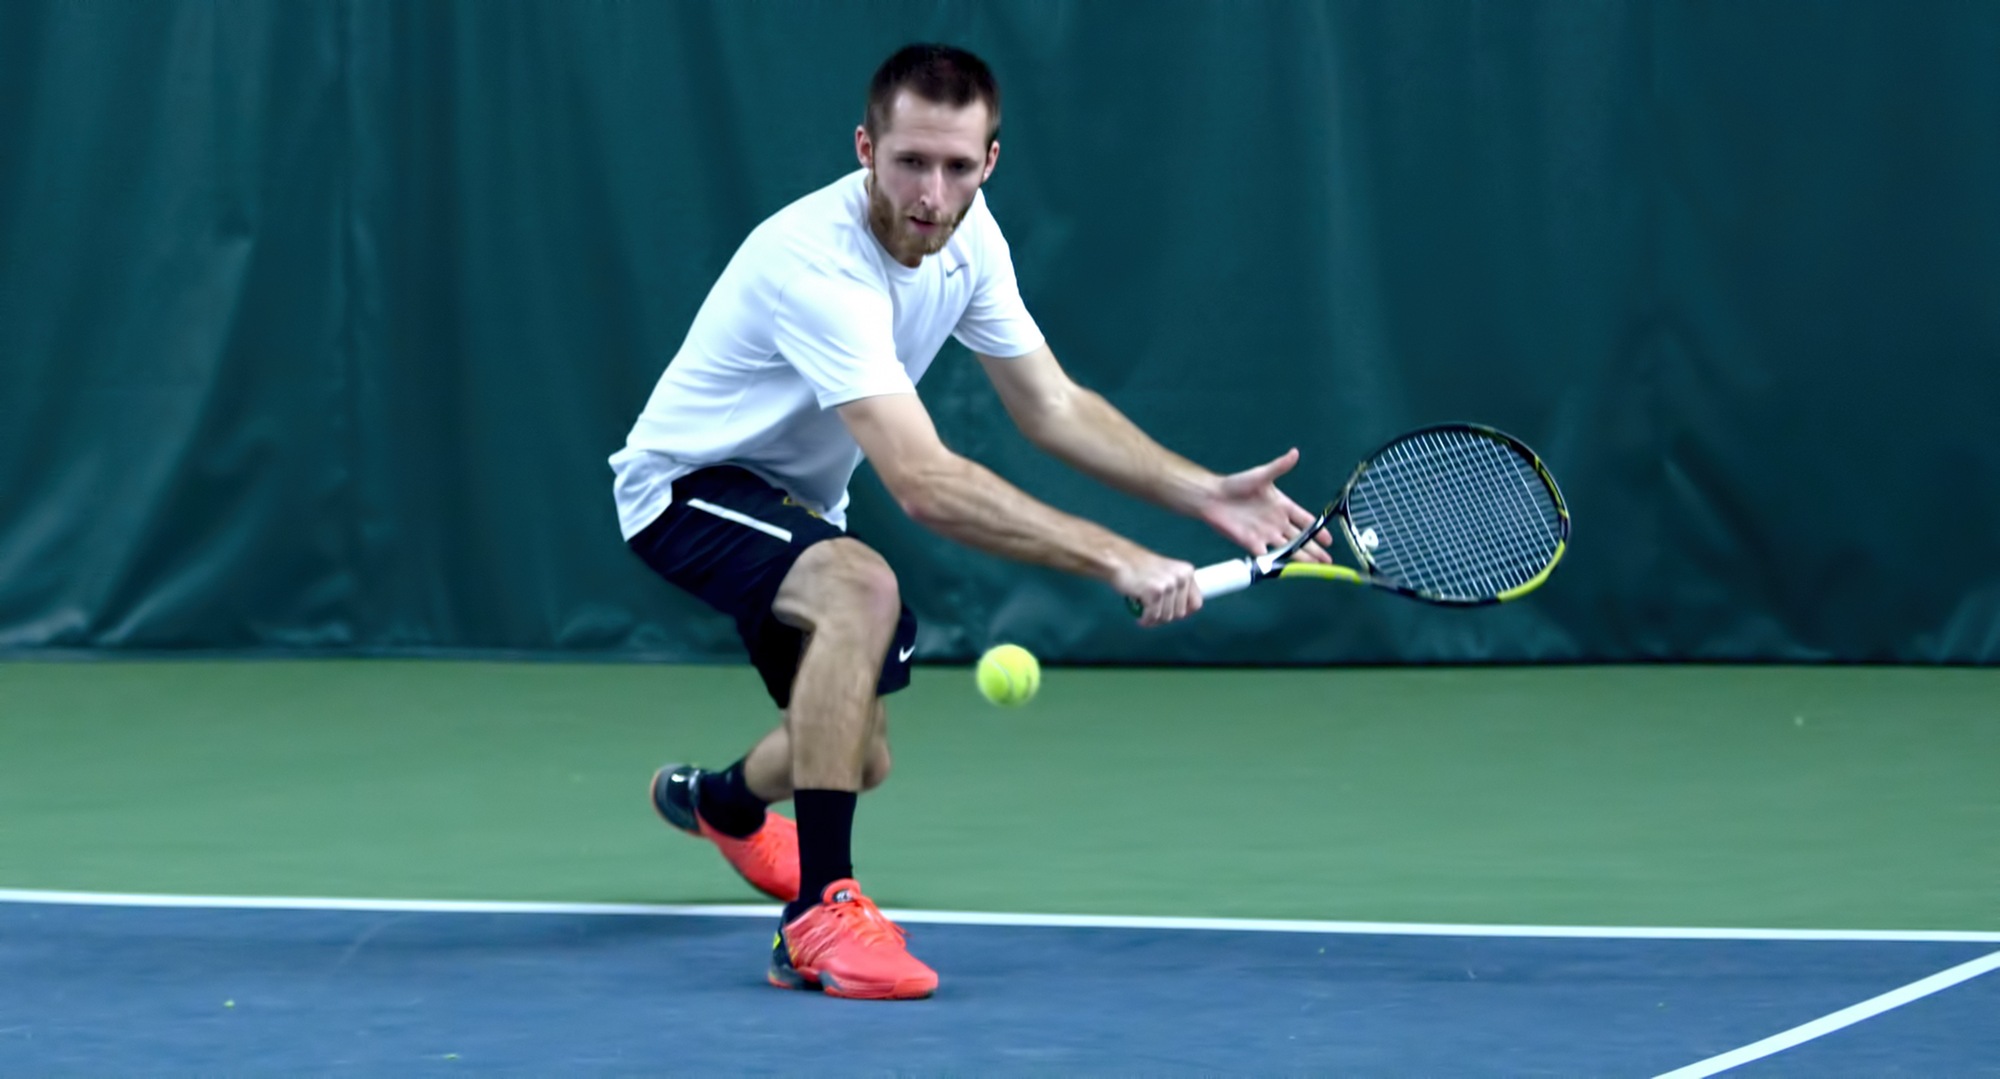 Senior Jesse Schneeberger won both his singles and doubles matches in the final team match of his career and ended 2017 with career highs in singles and doubles victories.